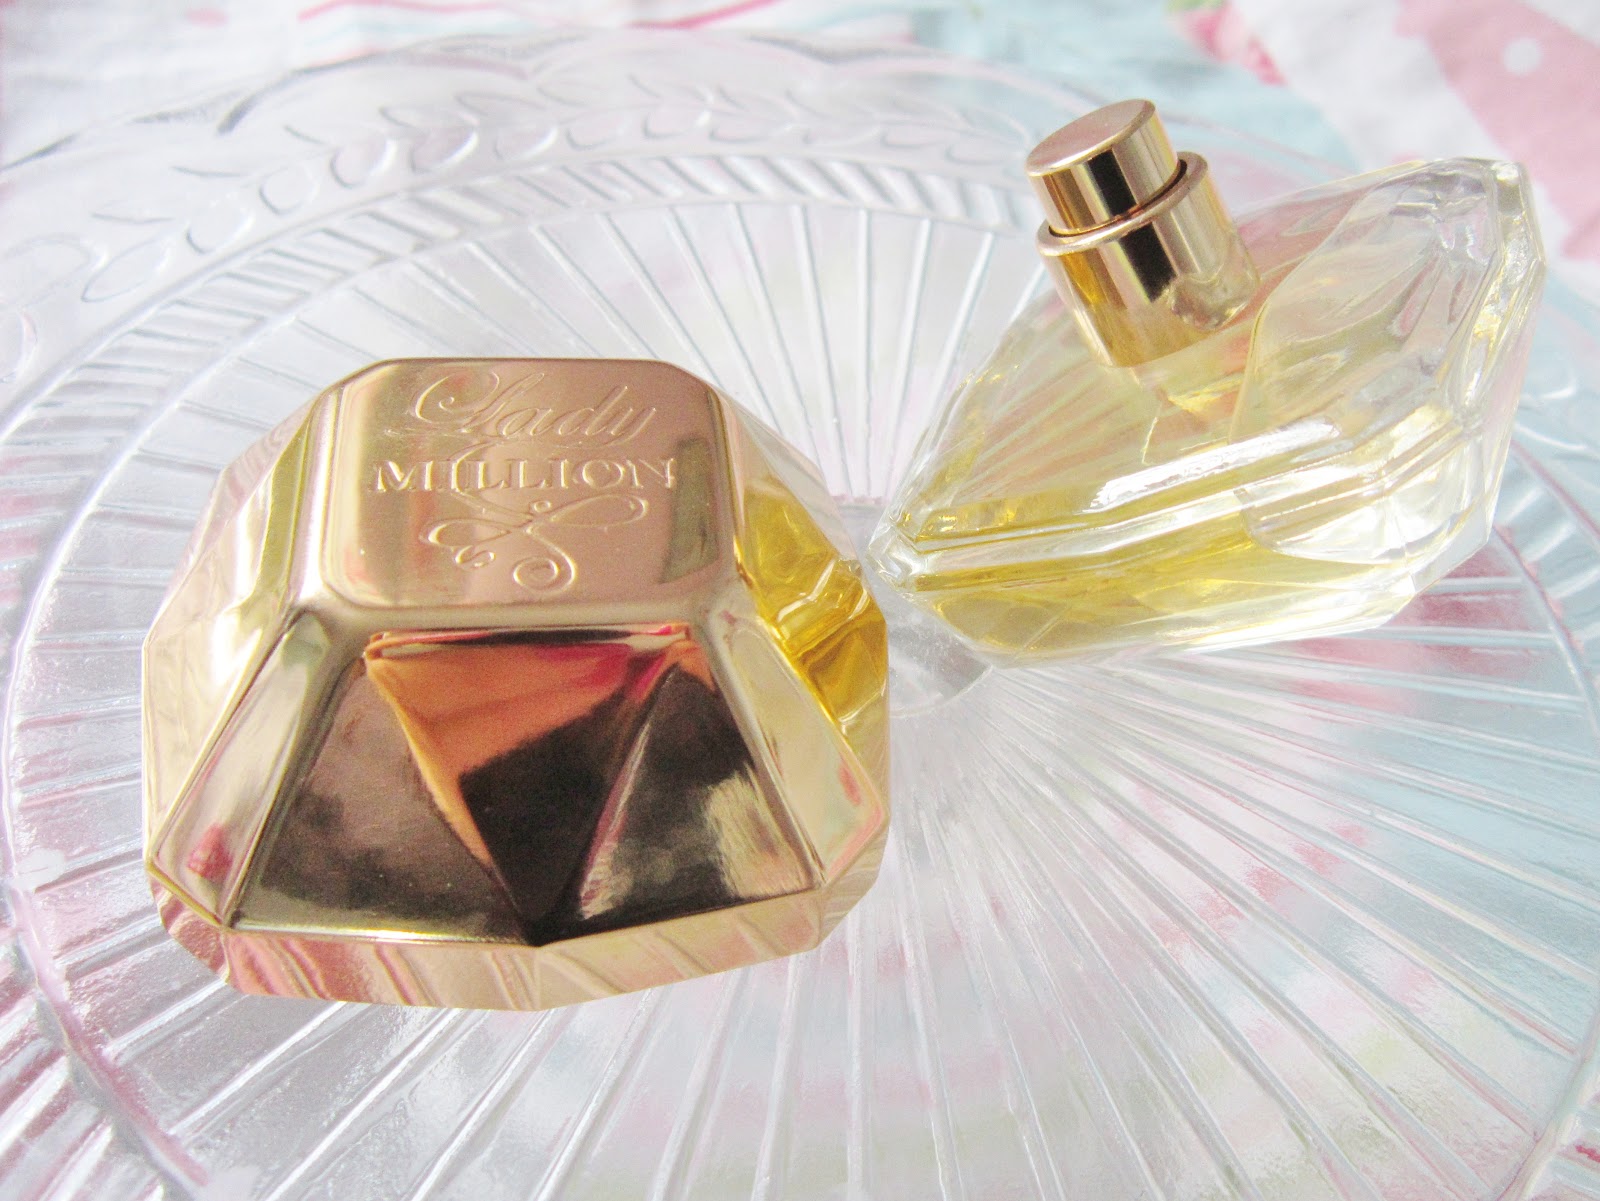 Lady Million by Paco Rabanne Perfume Review ♥ - Victoria's Vintage Blog